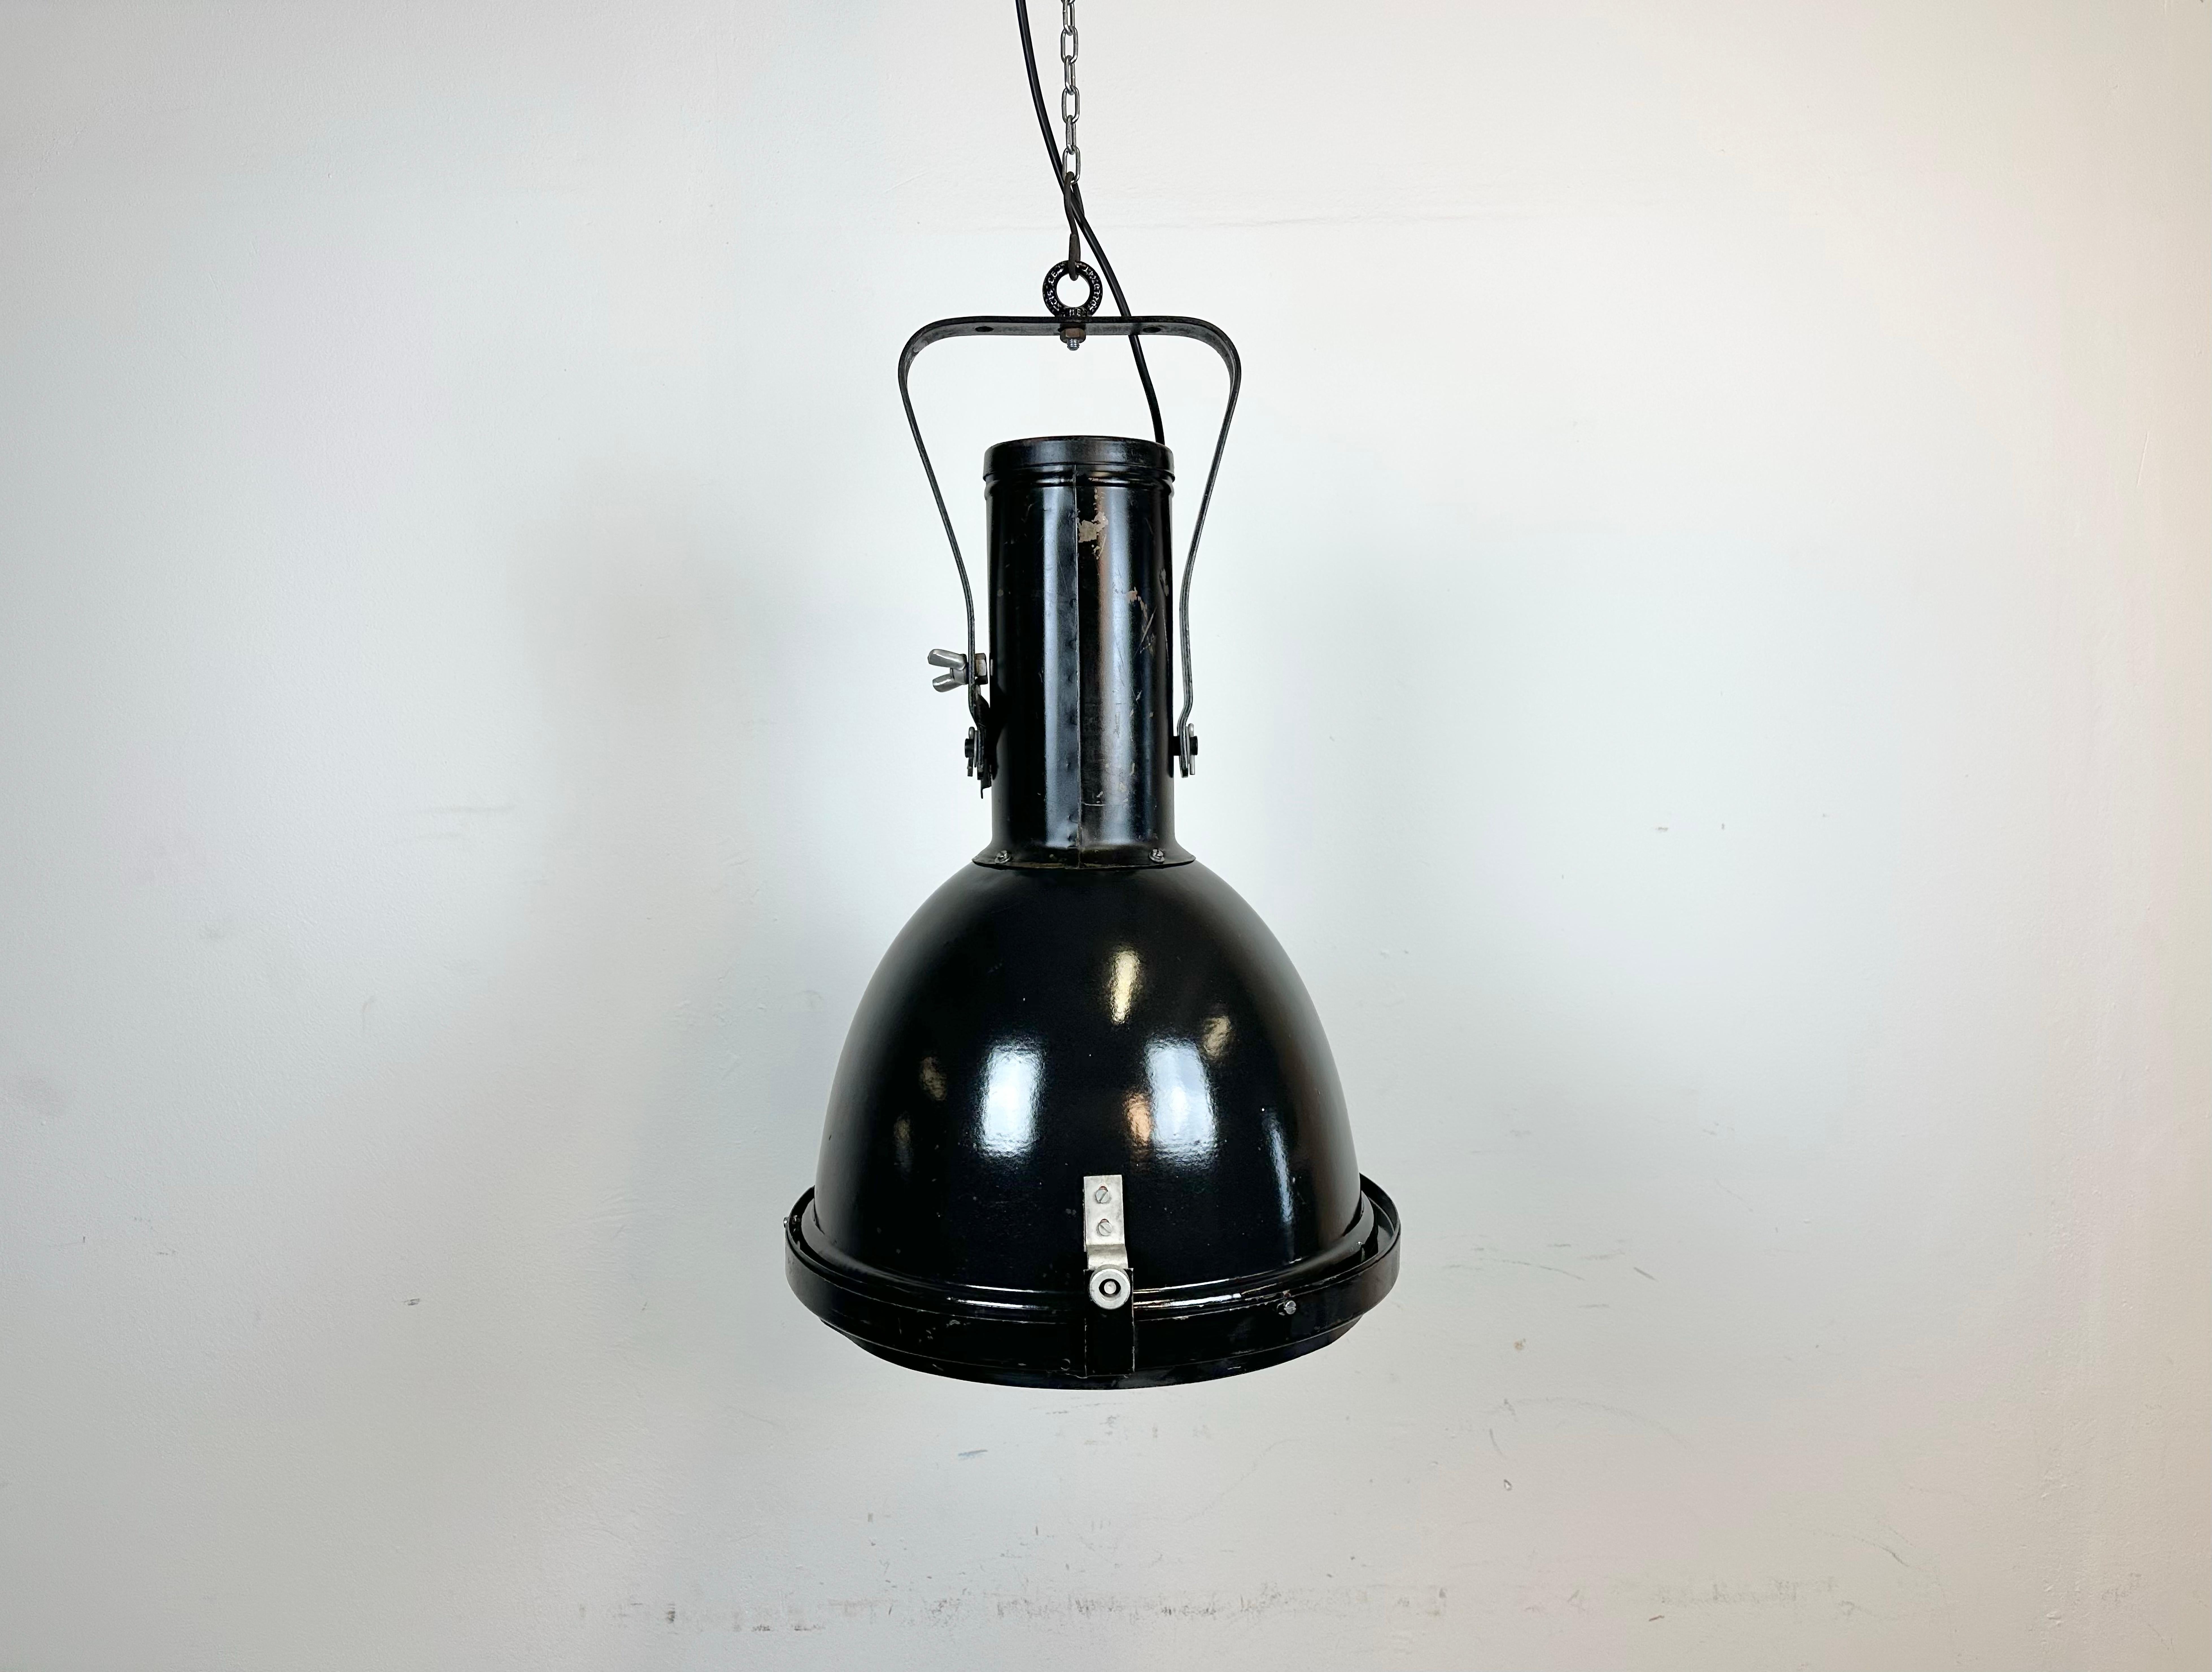 - Vintage factory spotlight made by Elektrosvit in former Czechoslovakia during the 1960s/70s
- It features a black enamel lampshade with white enamel interior, an iron top and convex clear glass cover
- The porcelain socket requires E27/ E26